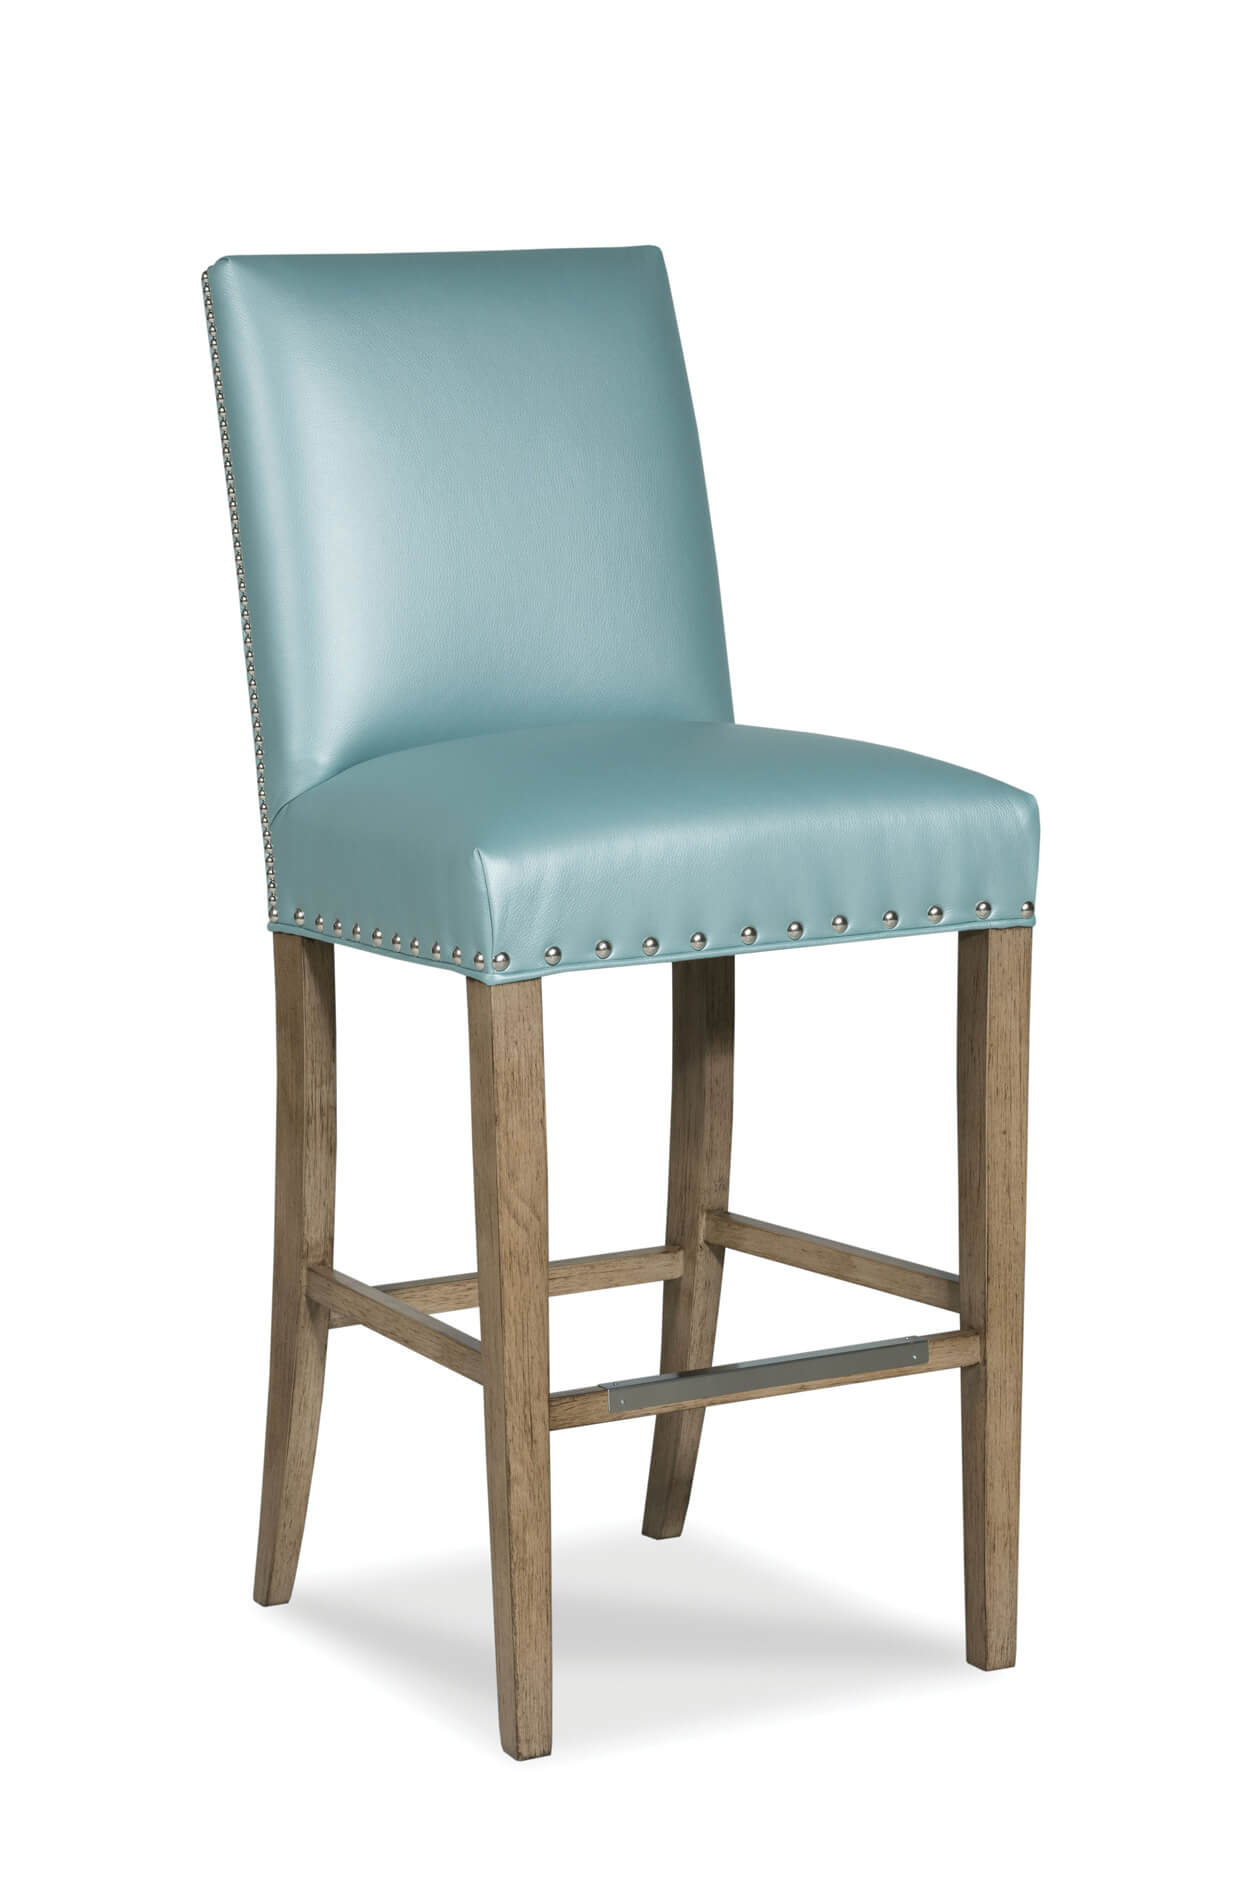 Fairfield S Evans Upholstered Wood, Teal Colored Leather Bar Stools